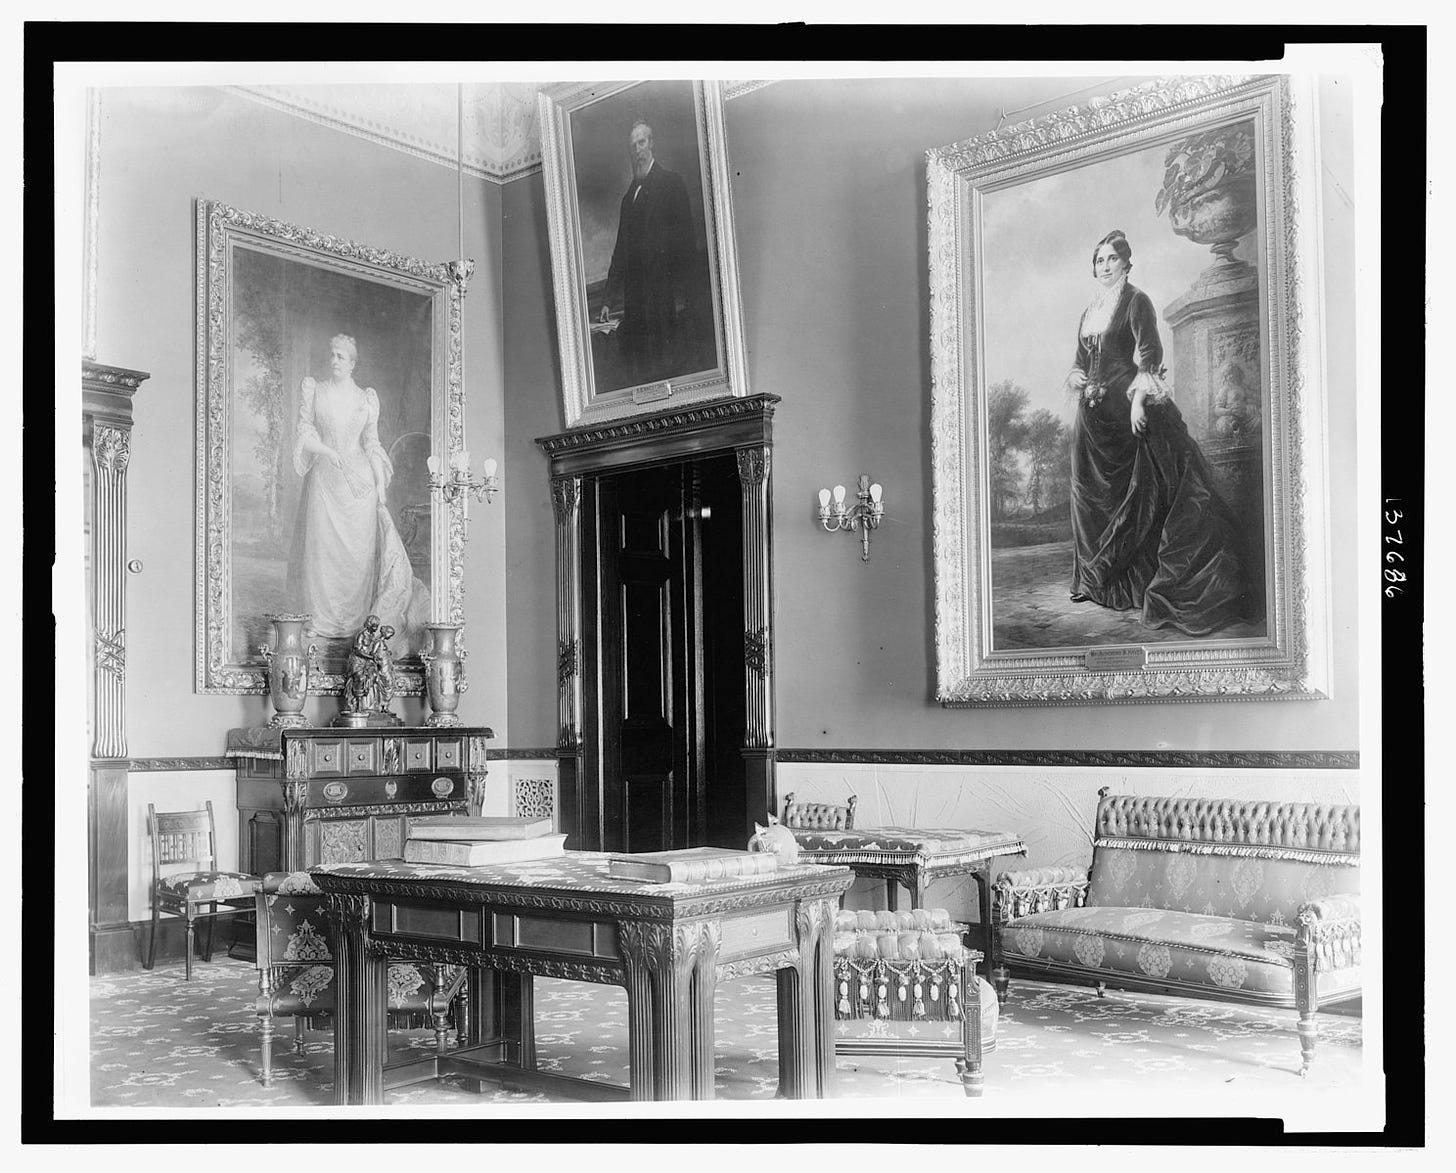 The Red Room at the White House in 1890. Mary Todd Lincoln held séances in the Red Room of the White House, some of which her husband attended, according to the National Archives Records Administration. 